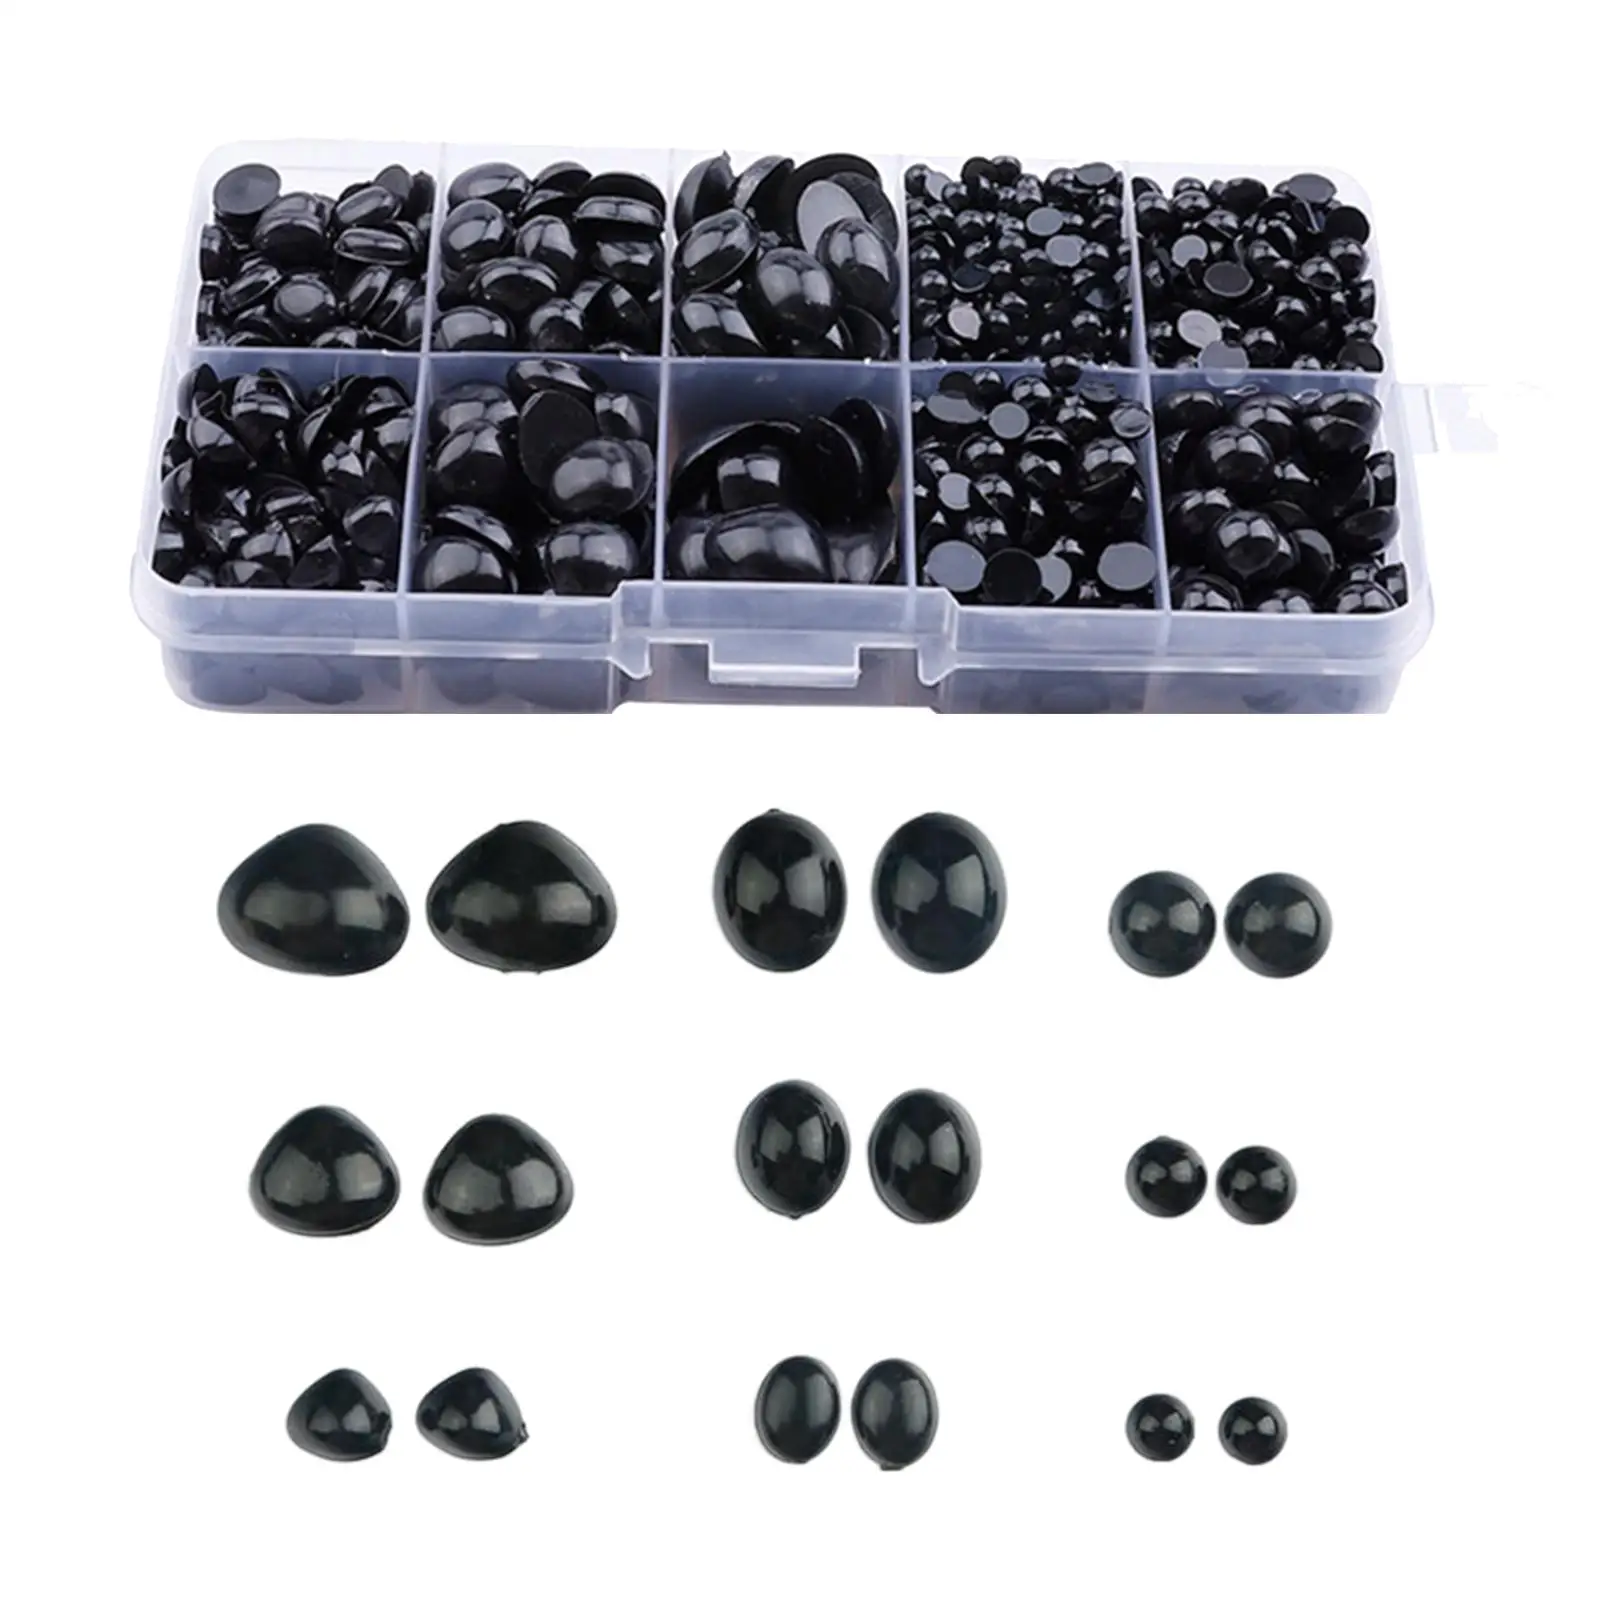 1000x Plastic Safety Eyes and Noses DIY Crafts Decoration Craft Doll Eyes for Puppet